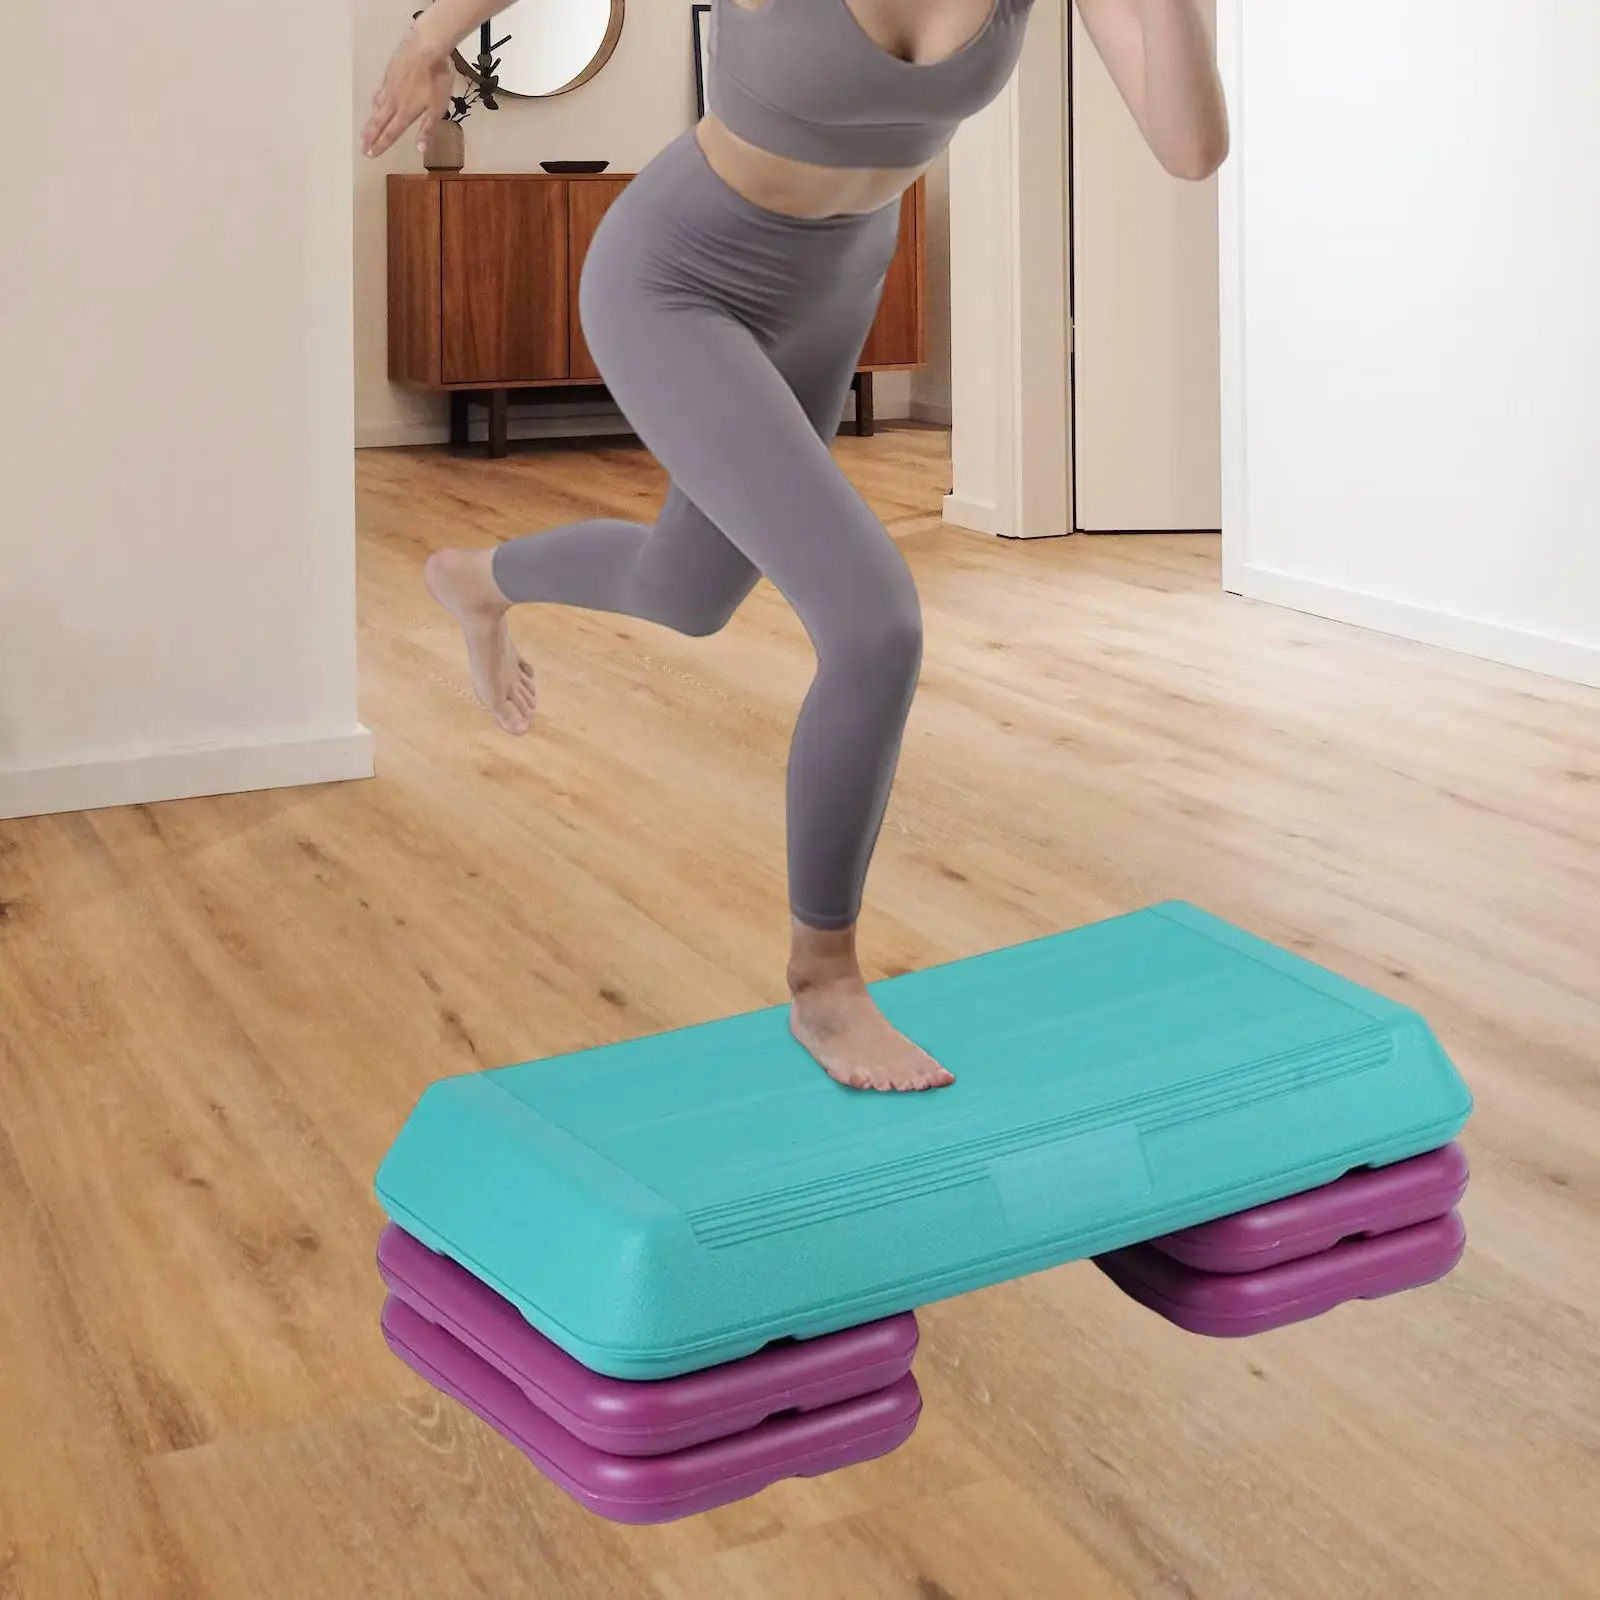 Fitness Pedal Adjustable Portable Durable Board Aerobic Step